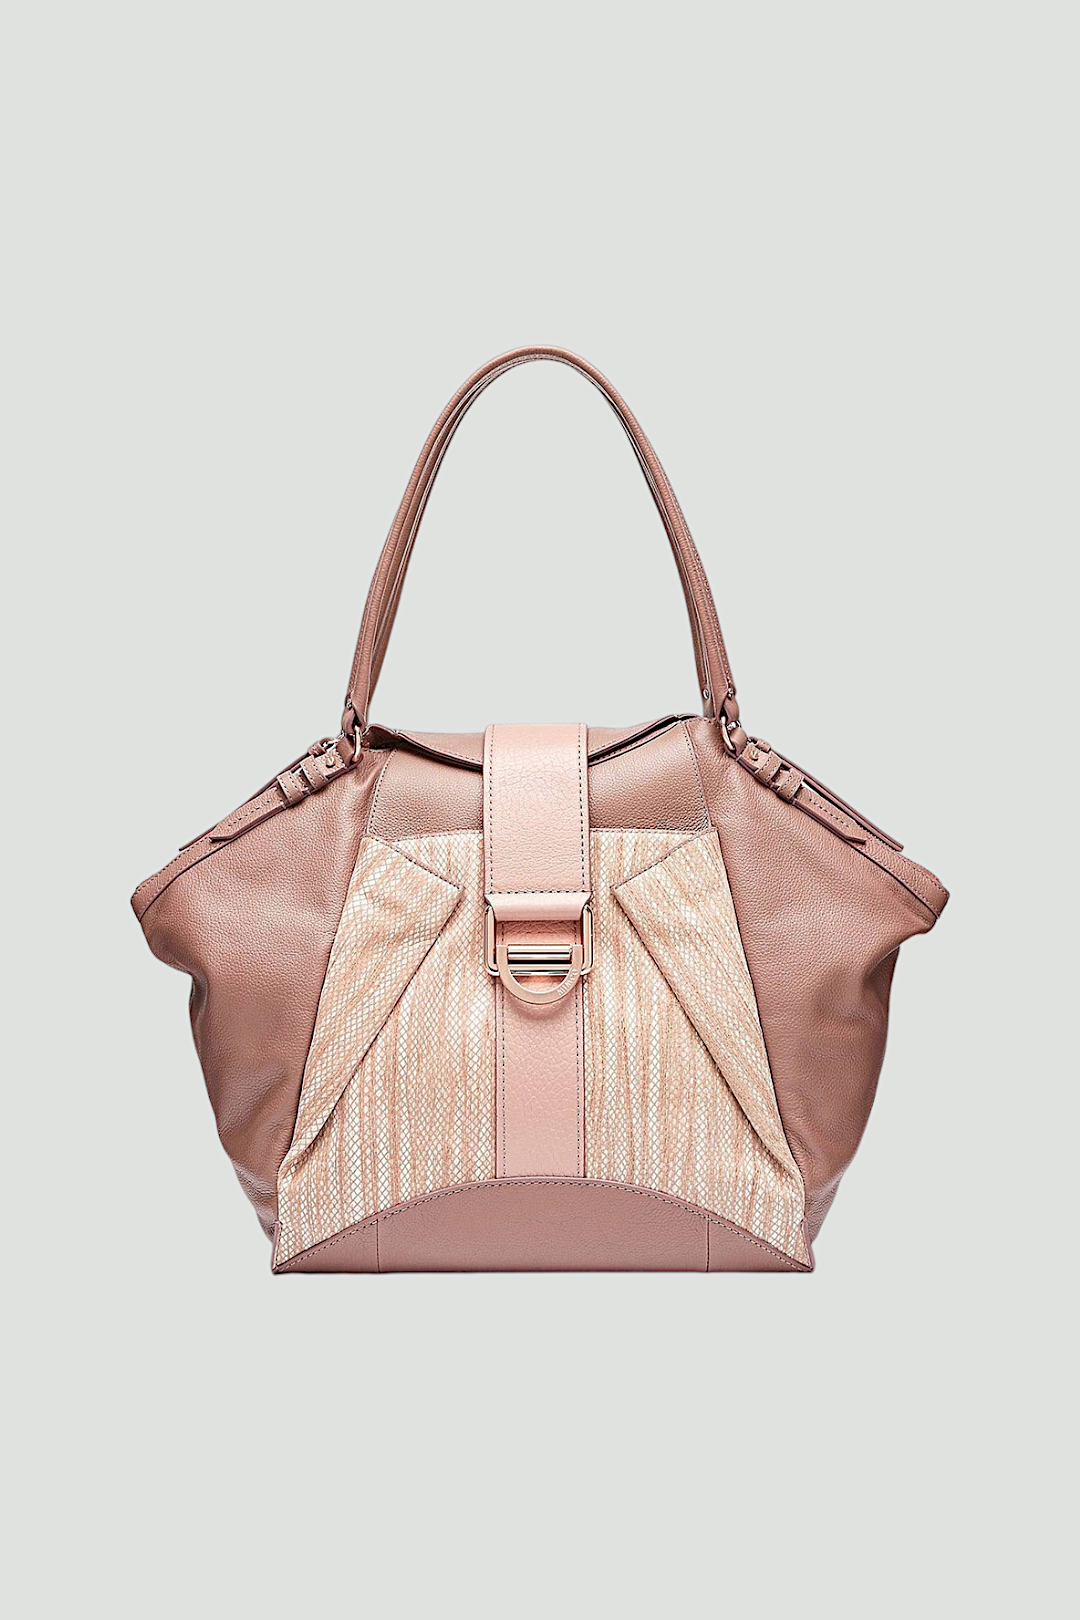 Mimco Modernist Tote in Rhubarb